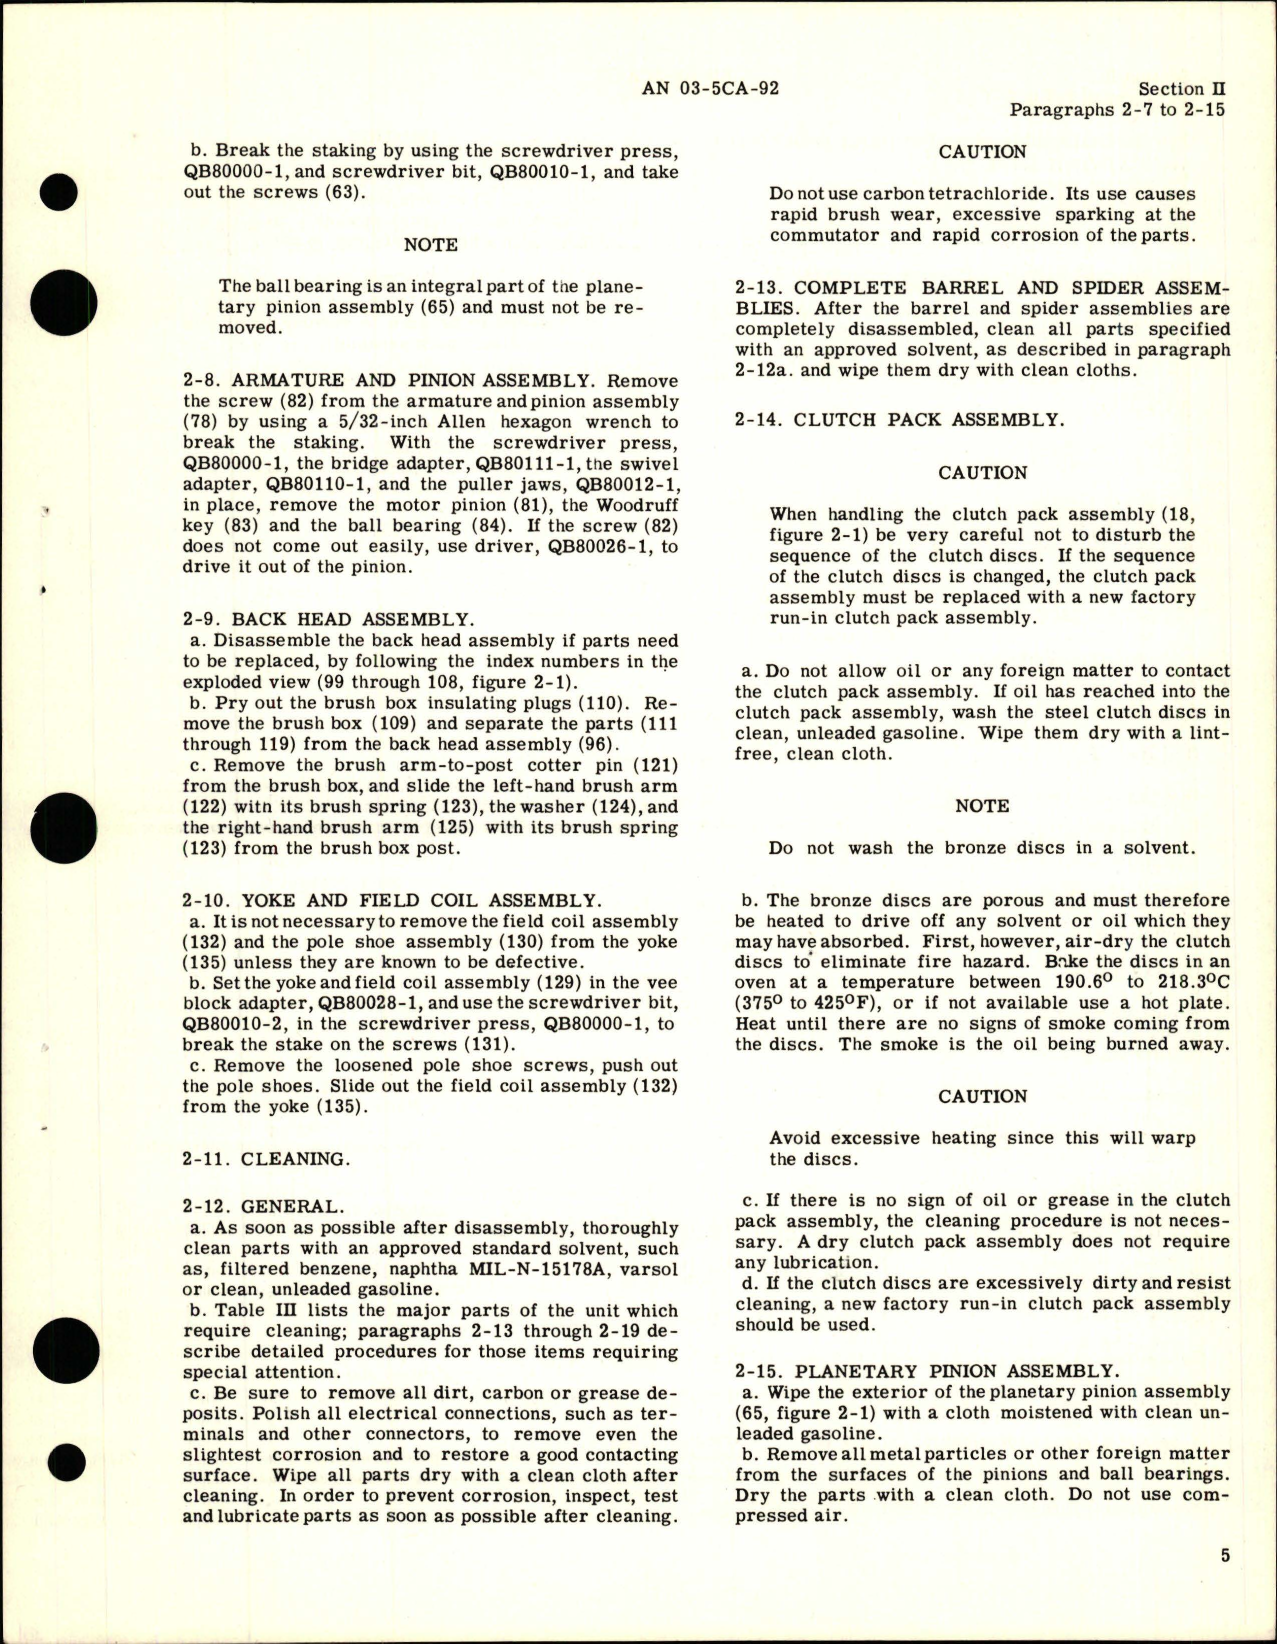 Sample page 9 from AirCorps Library document: Overhaul Instructions for Direct-Cranking Starter - Part 36E07-4-B